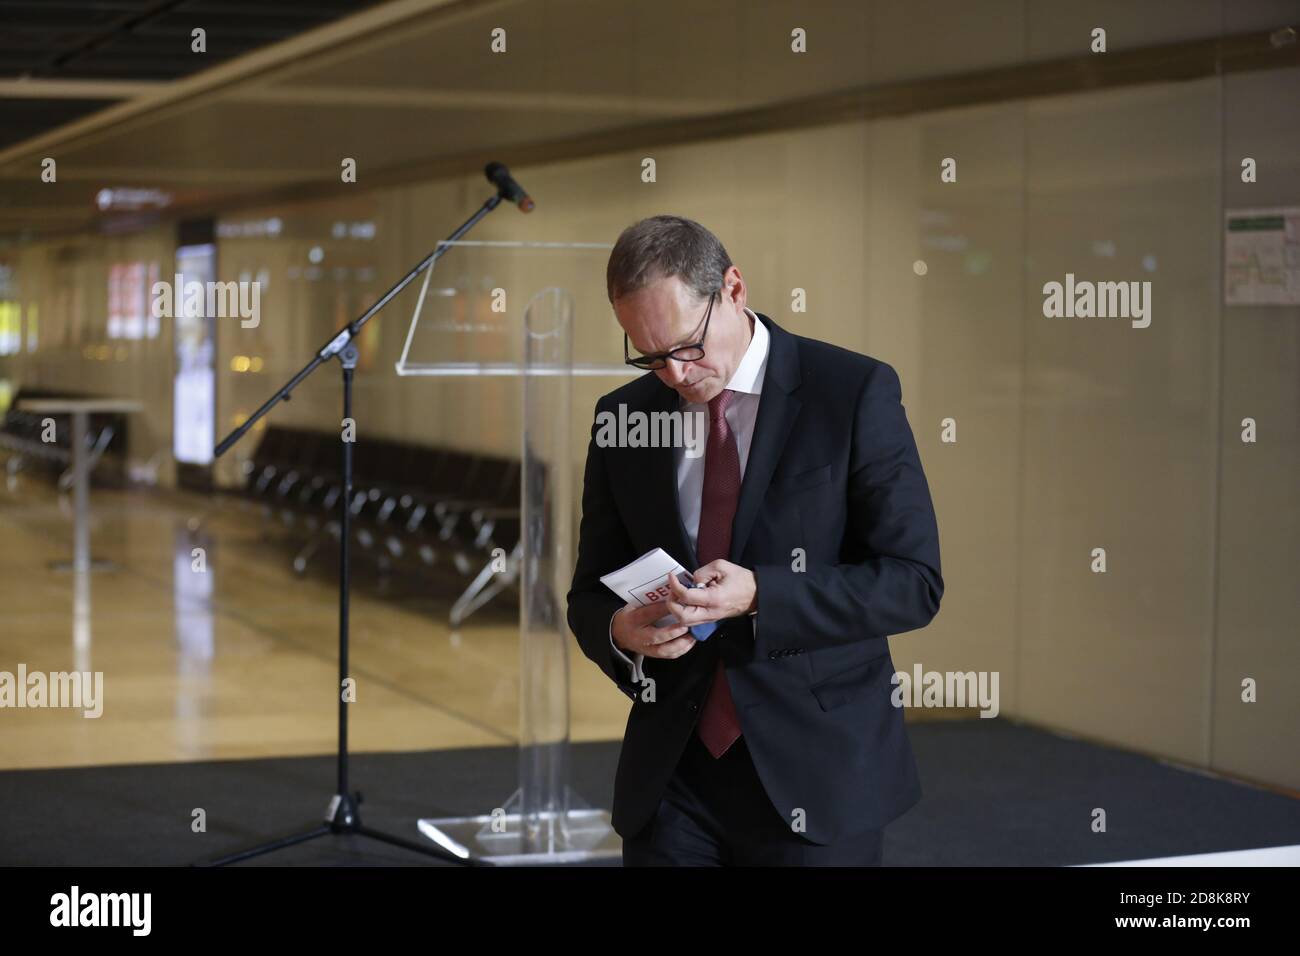 Brandenburg: The photo shows Michael Müller during his speech at the ceremonial unveiling of the Willy Brandt Wall at the new BER airport in Schönefeld. (Photo by Simone Kuhlmey/Pacific Press) Credit: Pacific Press Media Production Corp./Alamy Live News Stock Photo